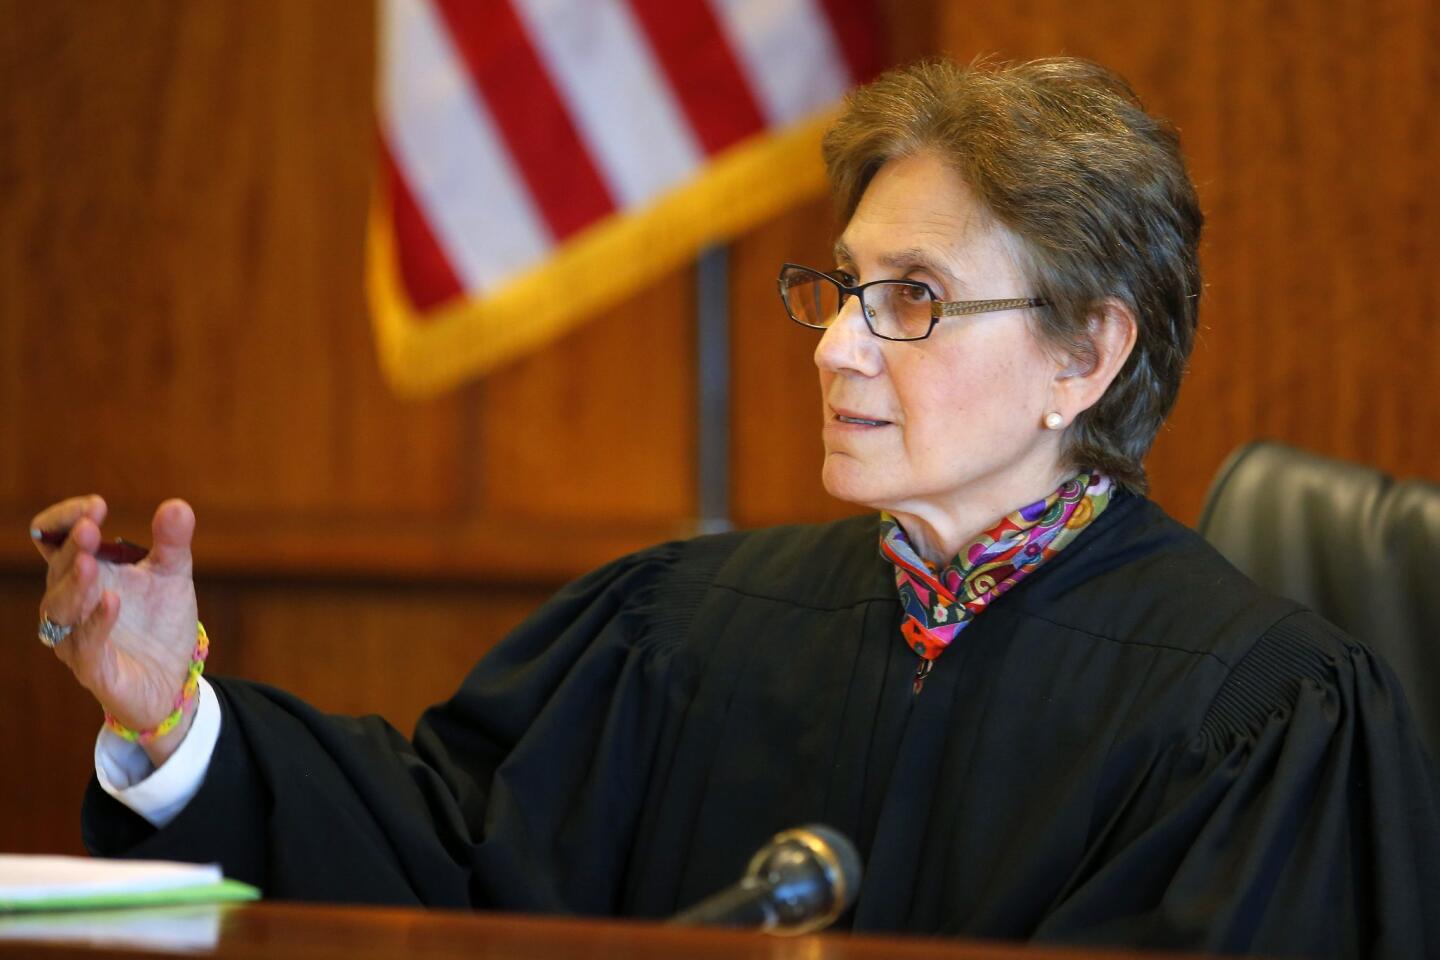 Judge Susan Garsh speaks during a pre-trial hearing in the case of Aaron Hernandez, former player for the NFL's New England Patriots football team, at the Bristol County Superior Court in Fall River, Massachusetts October 9, 2013, in connection with the death of semi-pro football player Odin Lloyd in June. Hernandez, who was a rising star in the NFL before his arrest and release by the Patriots, has pleaded not guilty.